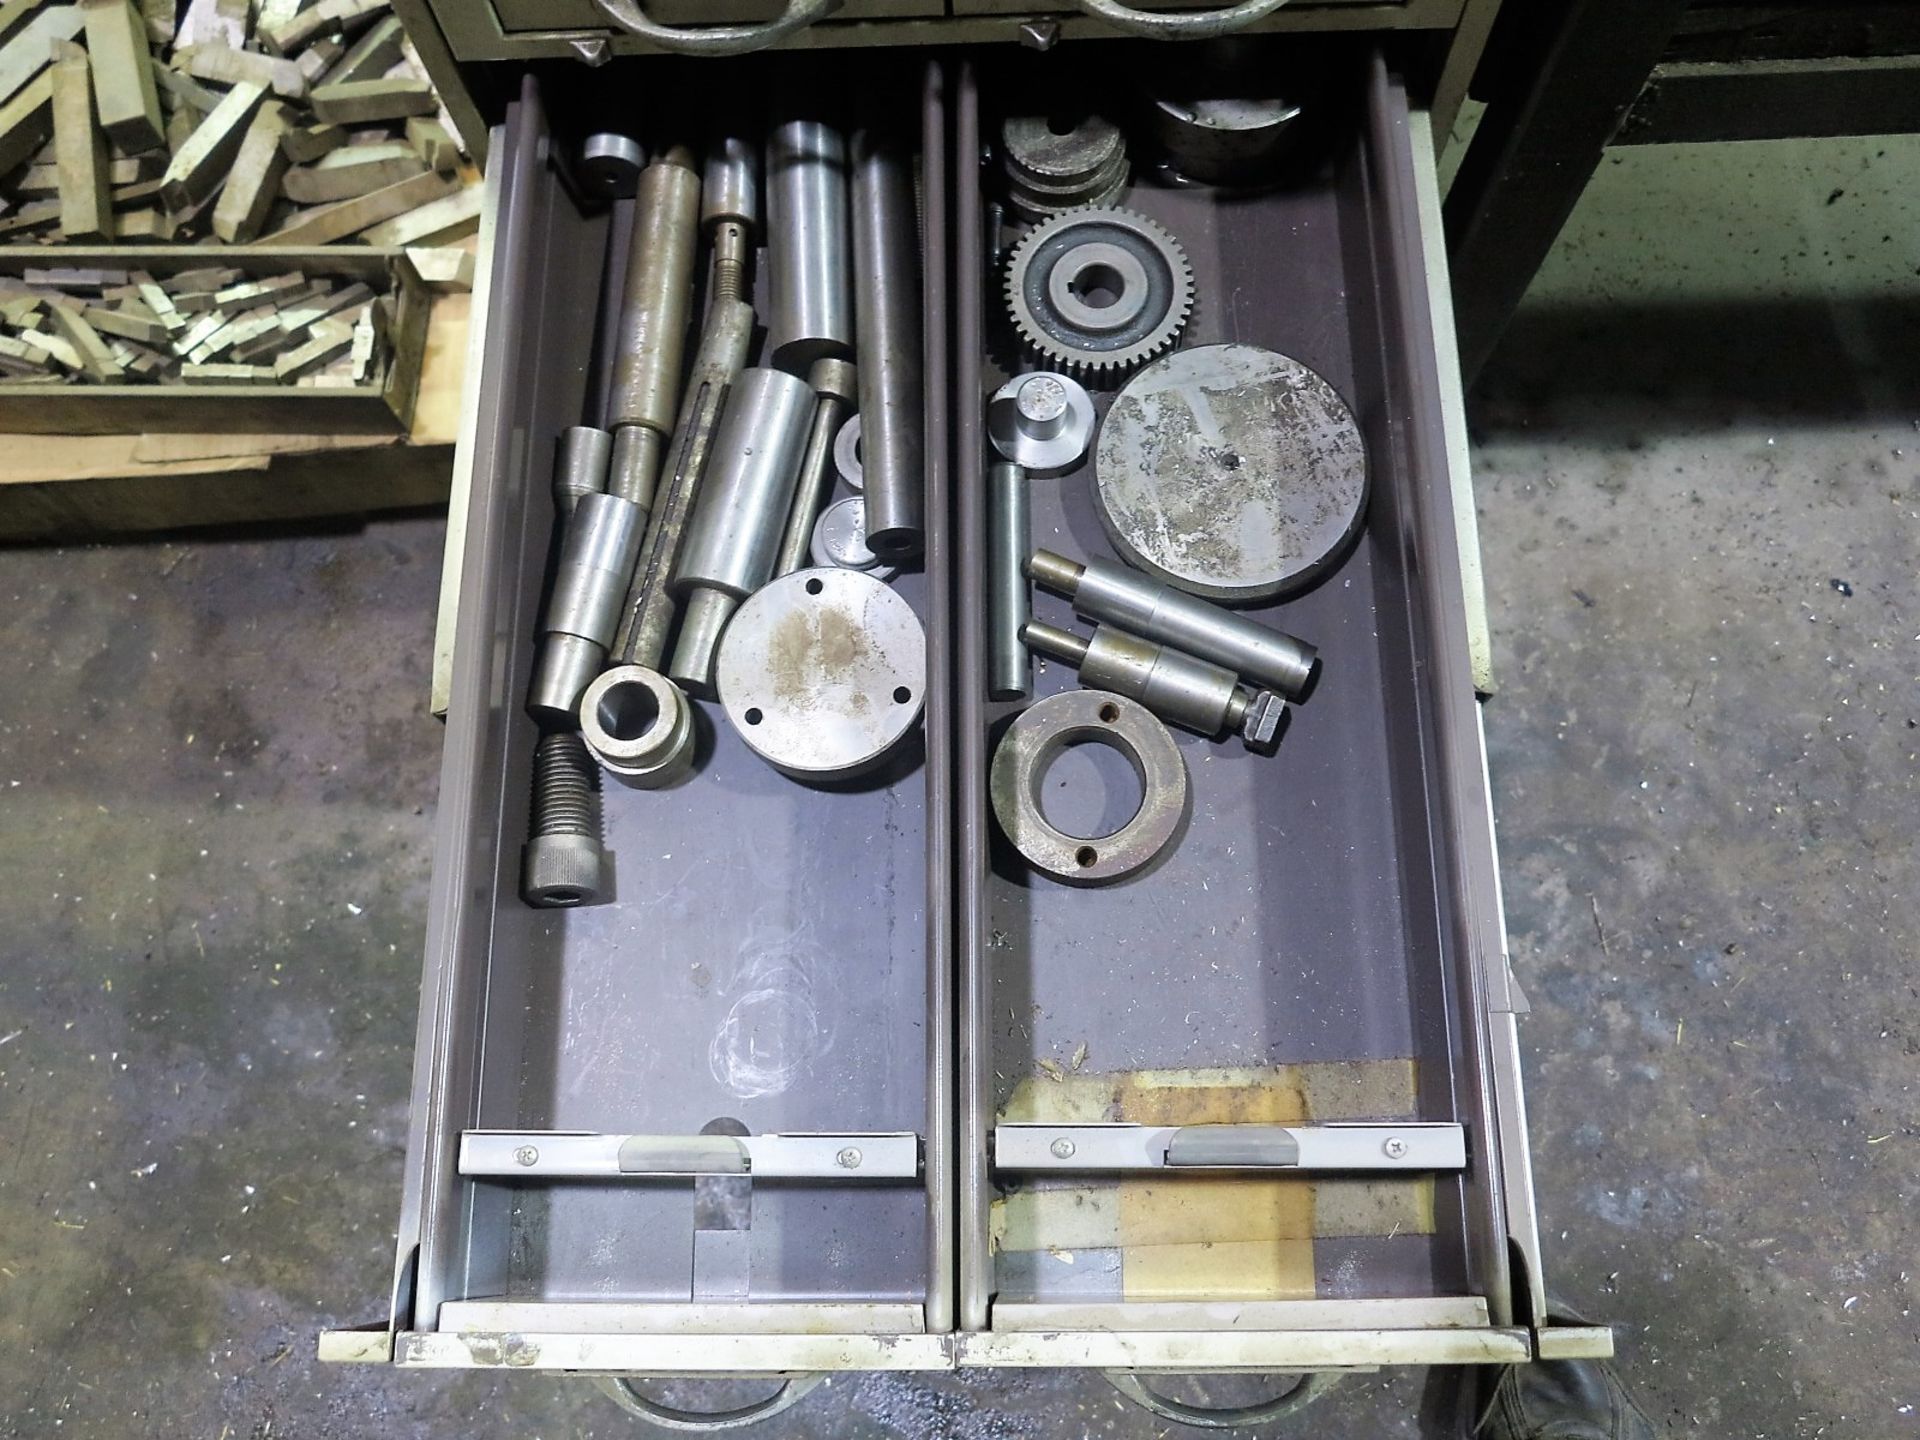 12 DRAWER PARTS CABINET W/ ENDMILLS, ALLENS, TAPS-DIES, AND RELATED ITEMS - Image 8 of 8